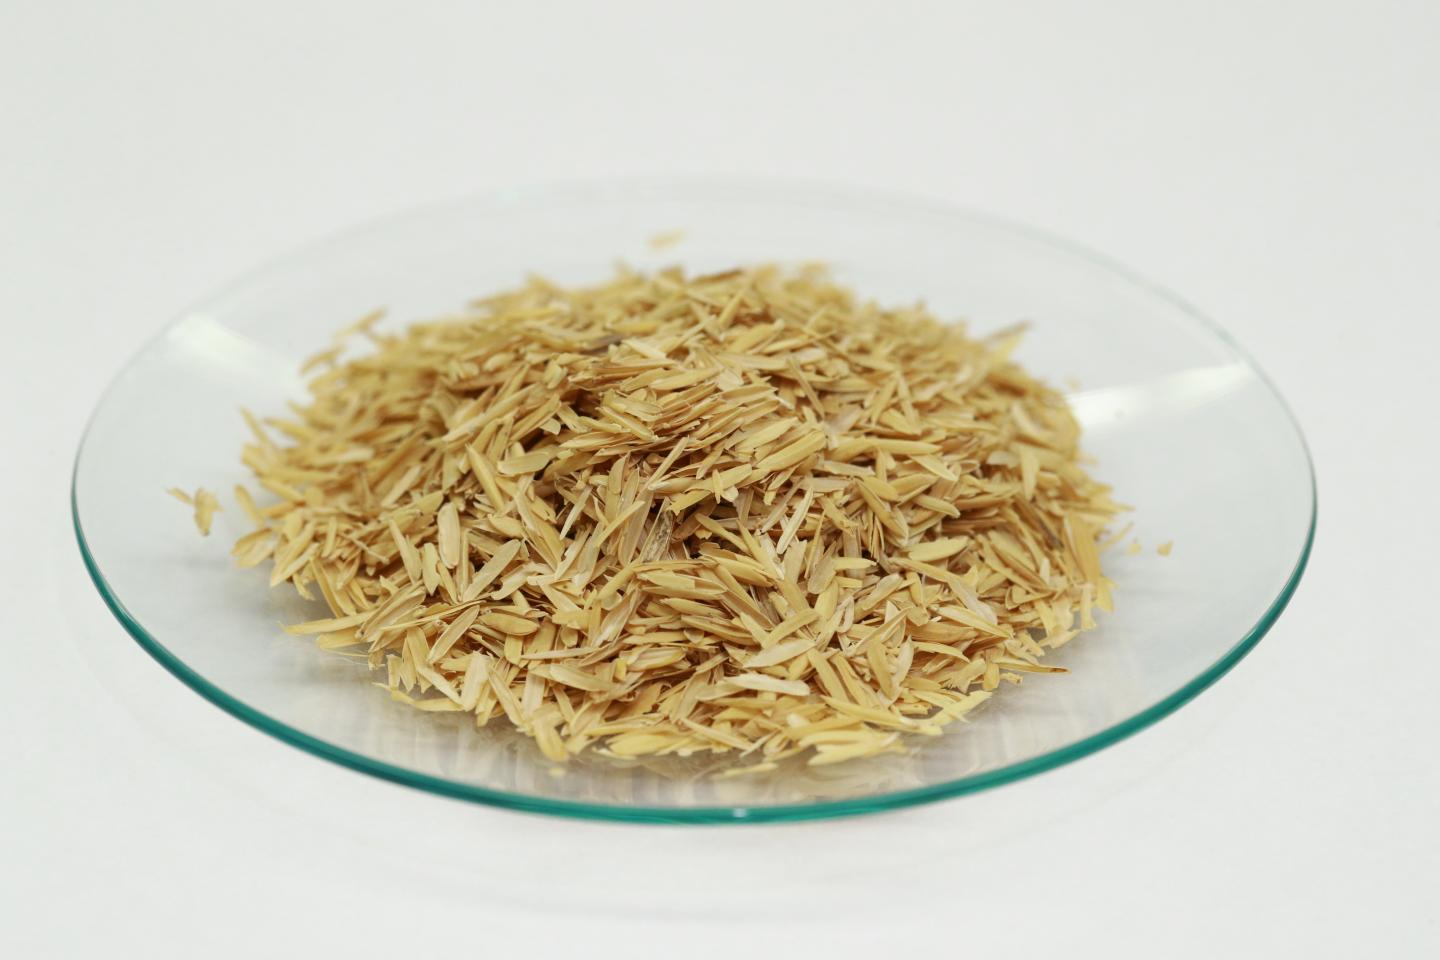 Raw Rice Husks Can Be Treated And Used To Remove Microcystin From Water